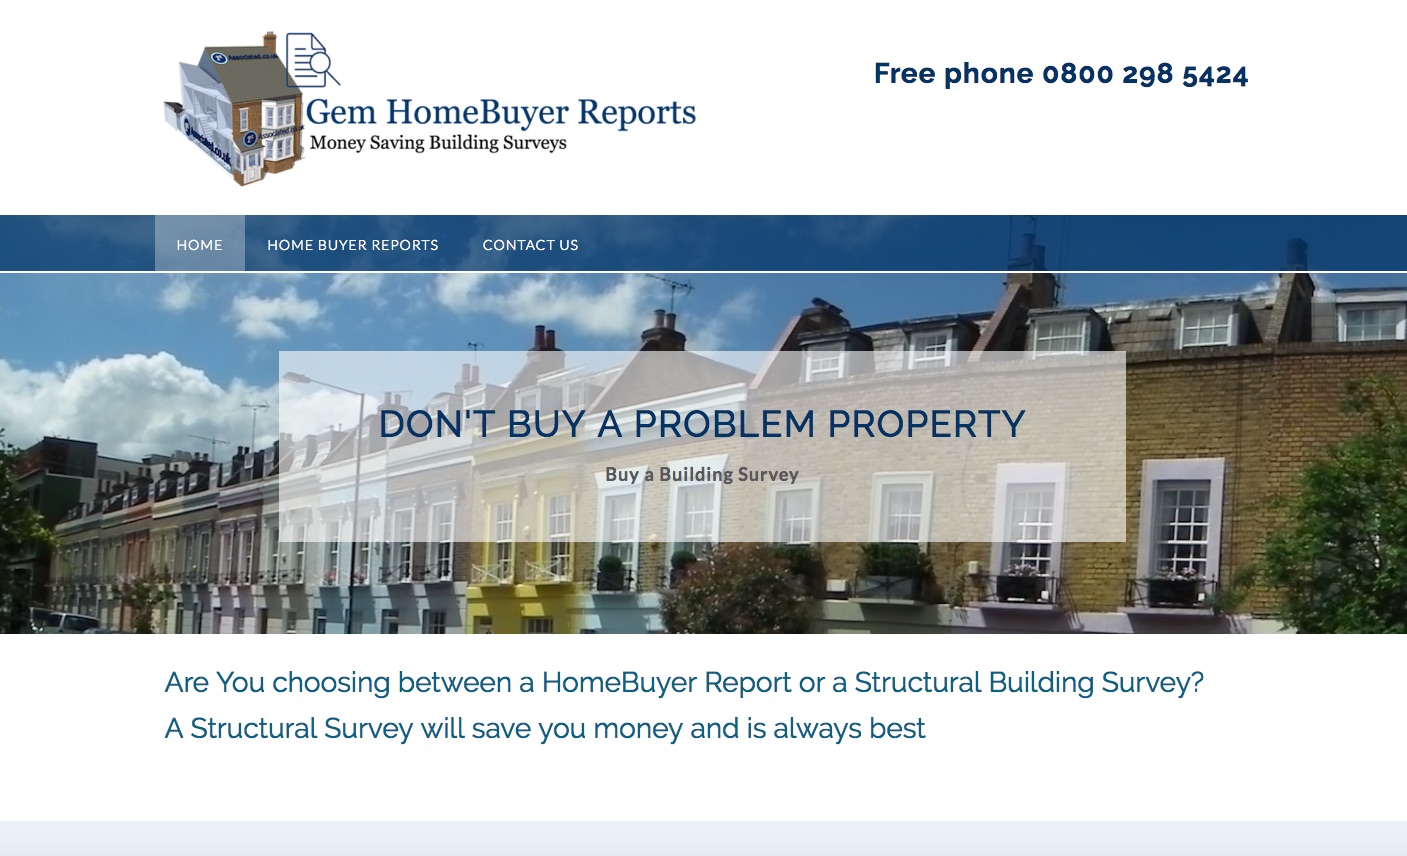 Website Brief - Take a Look at GemHomeBuyerReports.co.uk